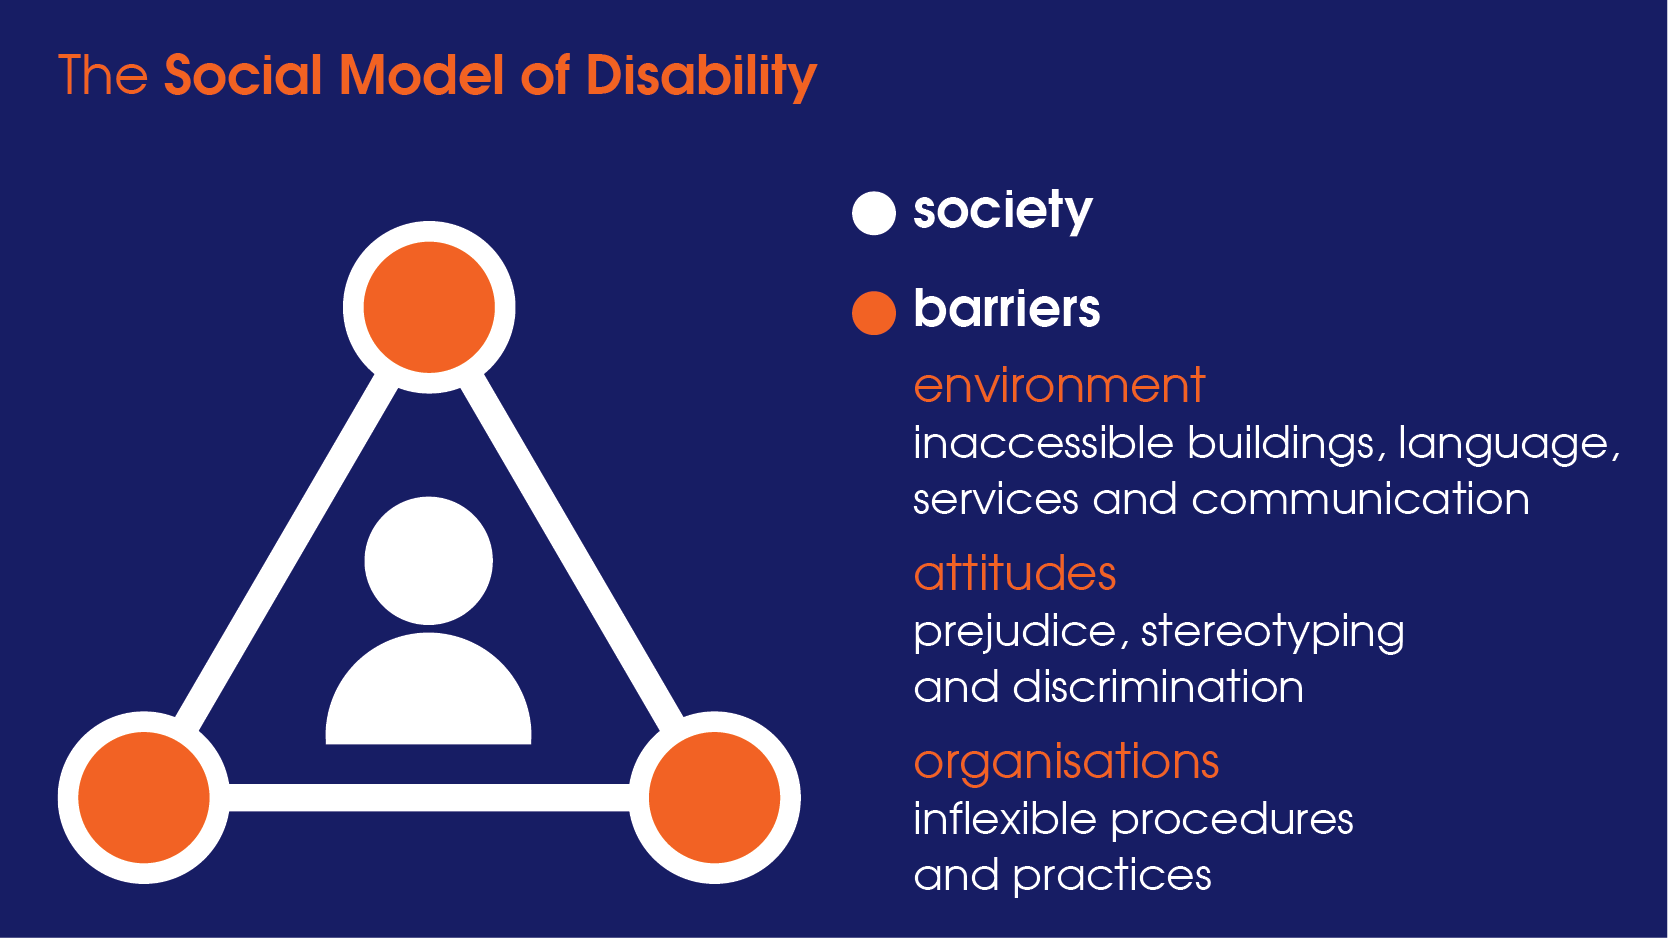 The Social Model of Disability